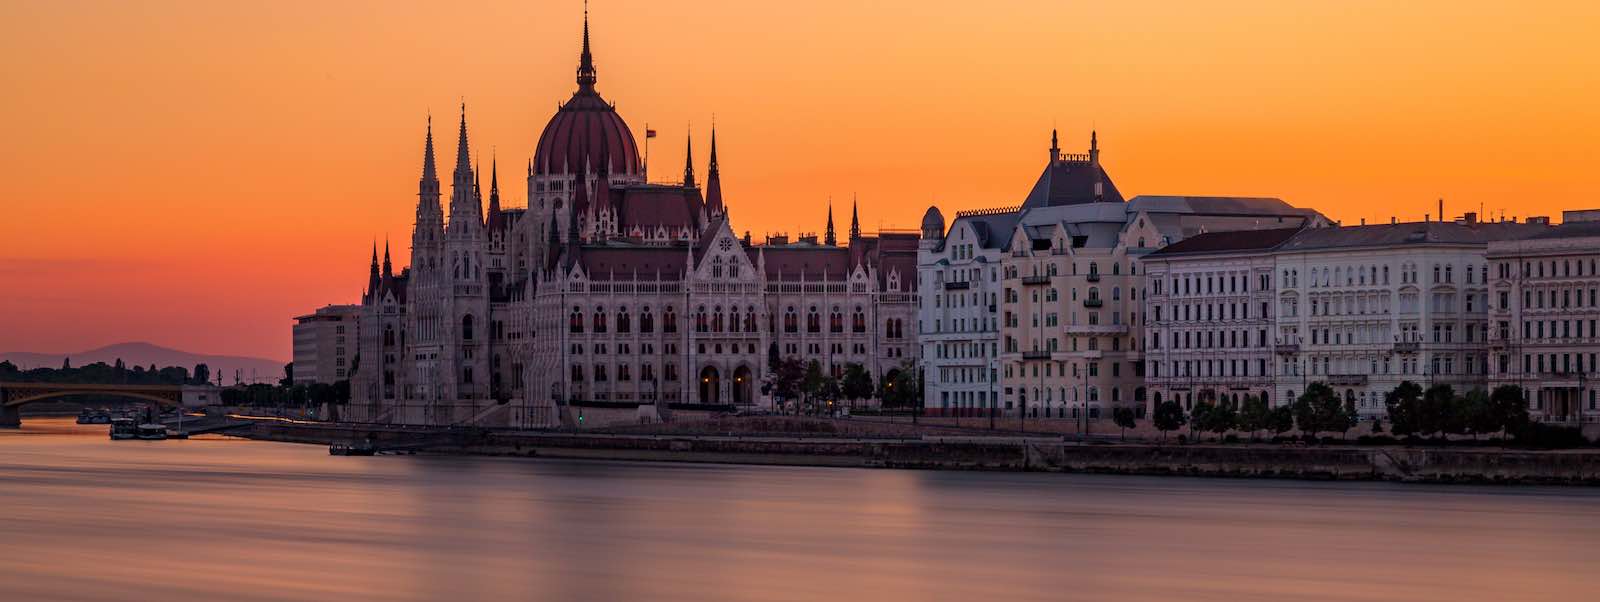 How to Set Up a Company in Hungary: Your Step-by-Step Guide